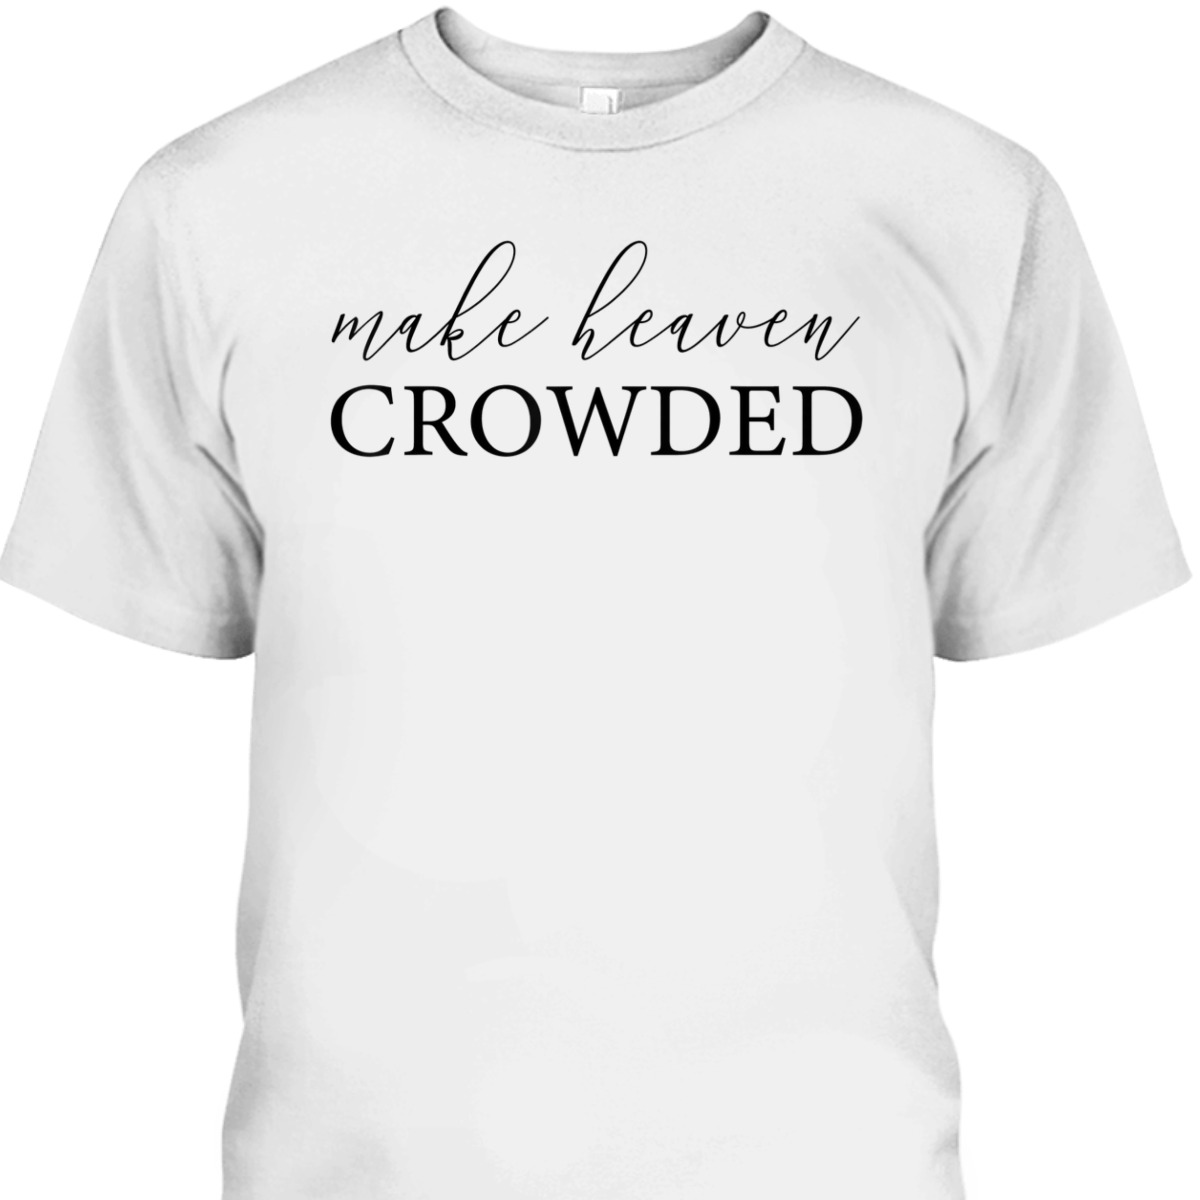 Make Heaven Crowded T-Shirt Christian Religious Gift